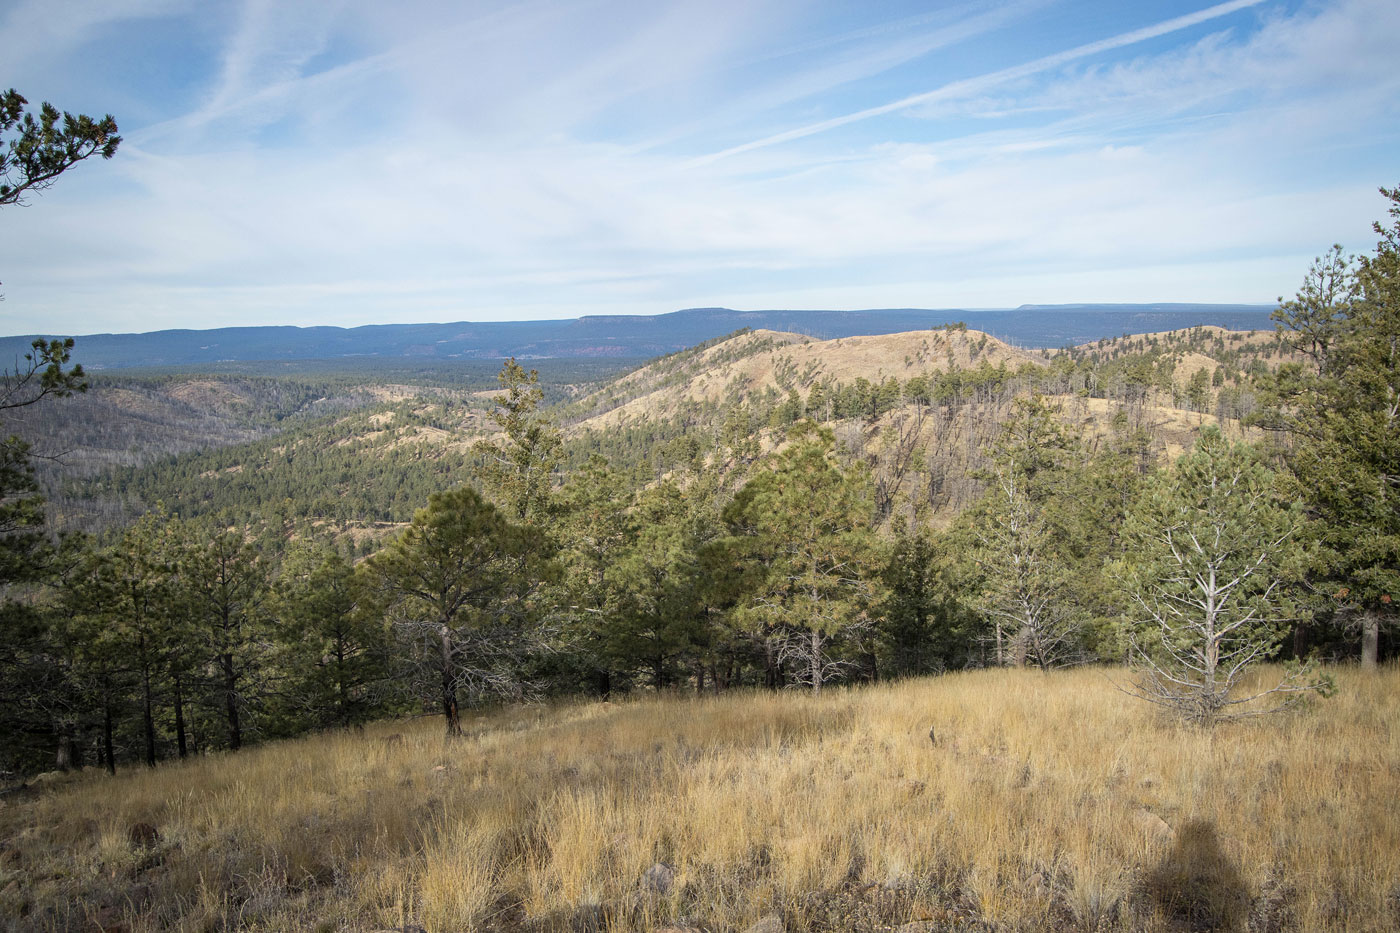 Hike Mount Sedgewick in Cibola National Forest, New Mexico - Stav is Lost